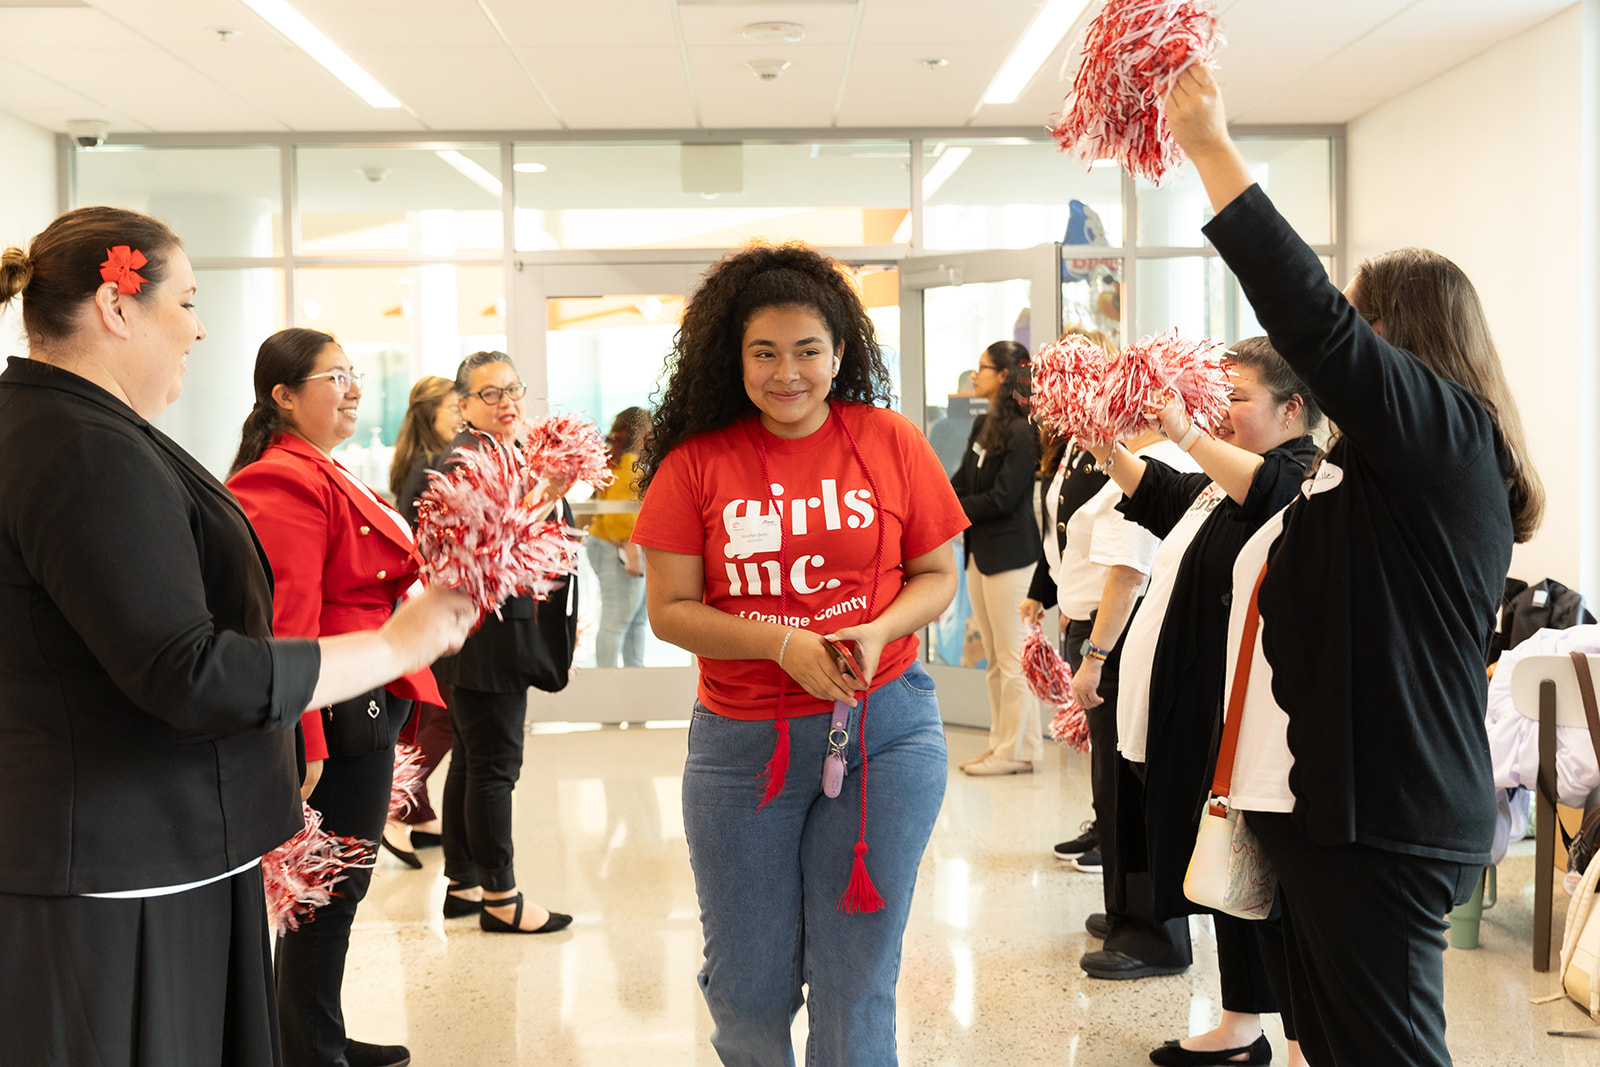 Girls Inc. of Orange County recently hosted its annual College Shower, where the nonprofit helps prepare 150 college-bound girls with essentials and scholarships to help with higher education. (Photo courtesy of Kimberly Kulak Photography)